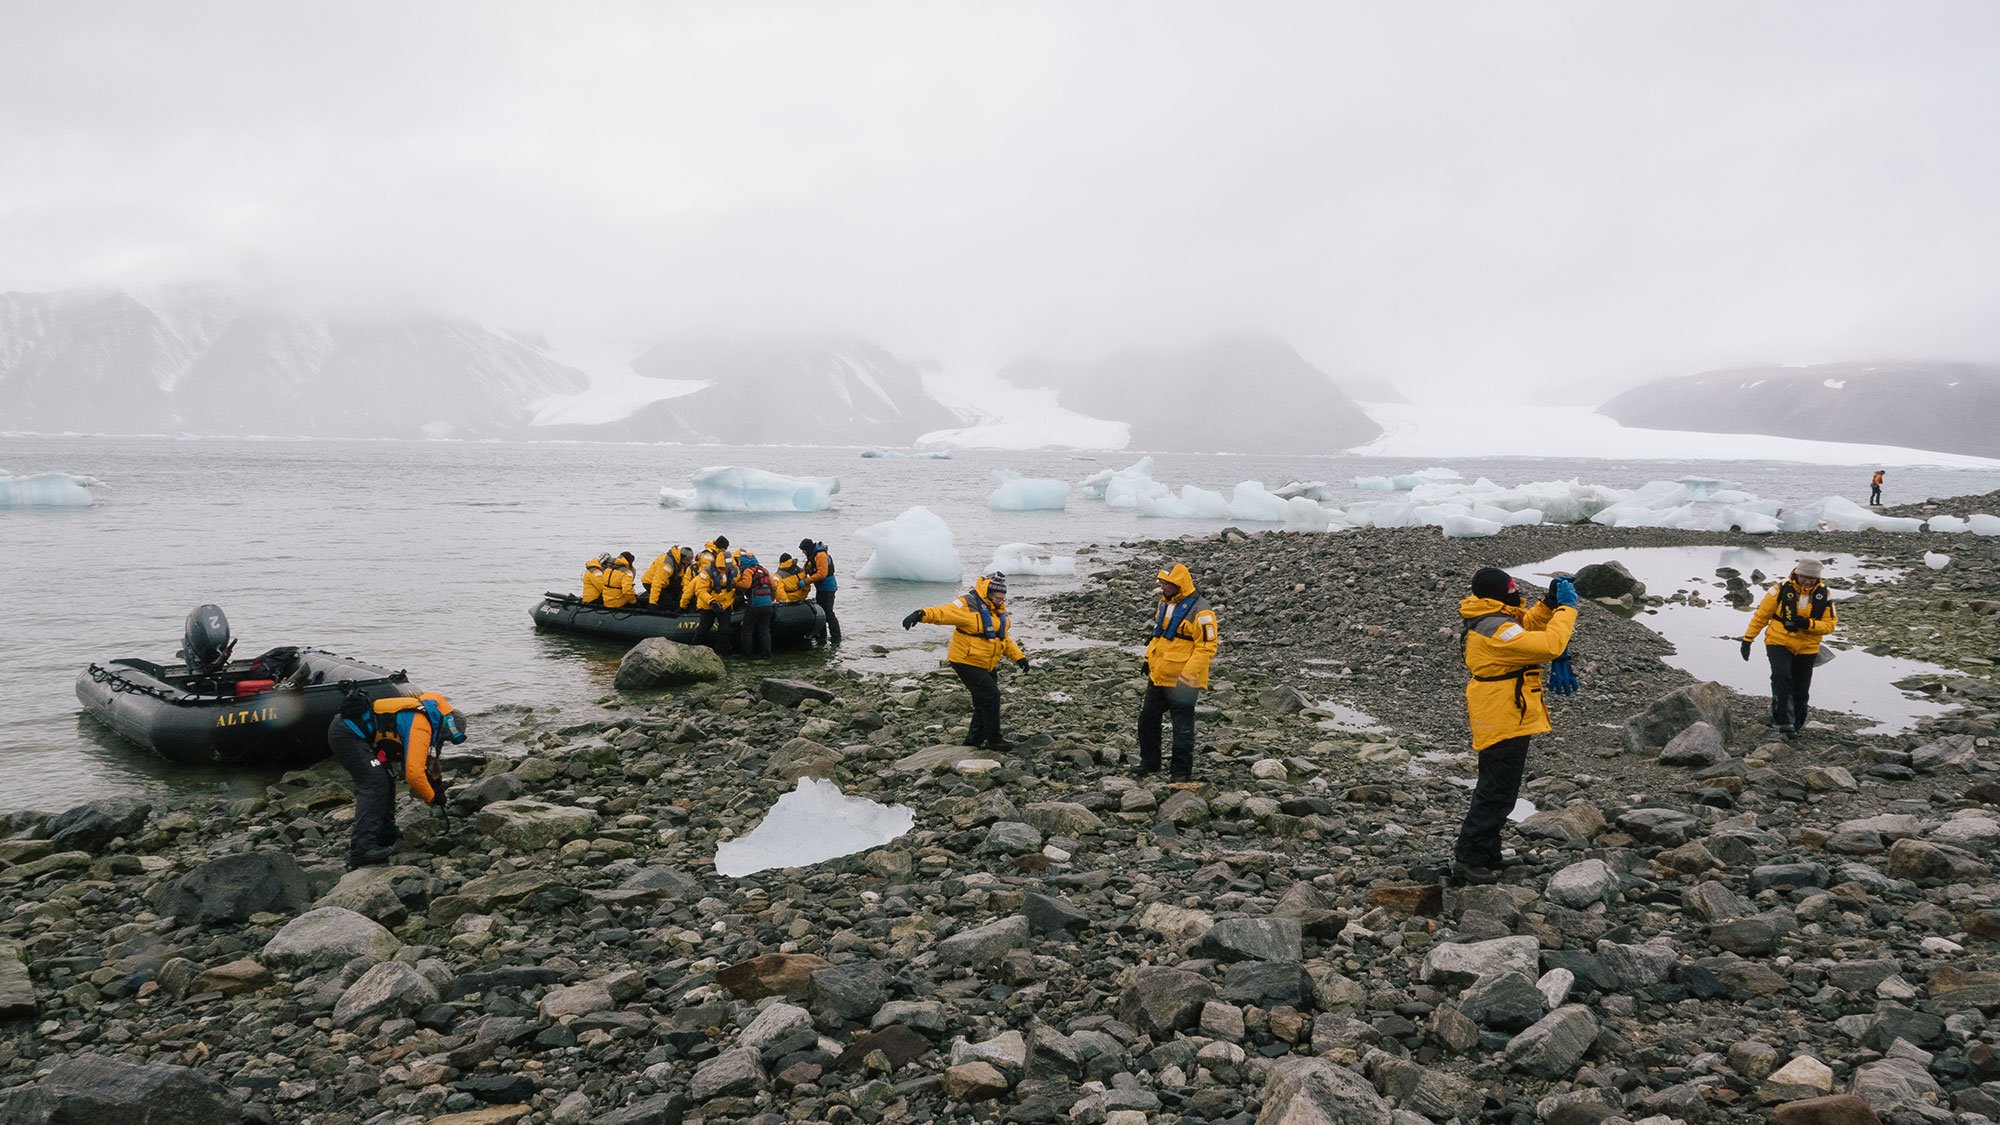 Quark Expeditions guests on a glacier landing during a voyage to Ellesmere Island.